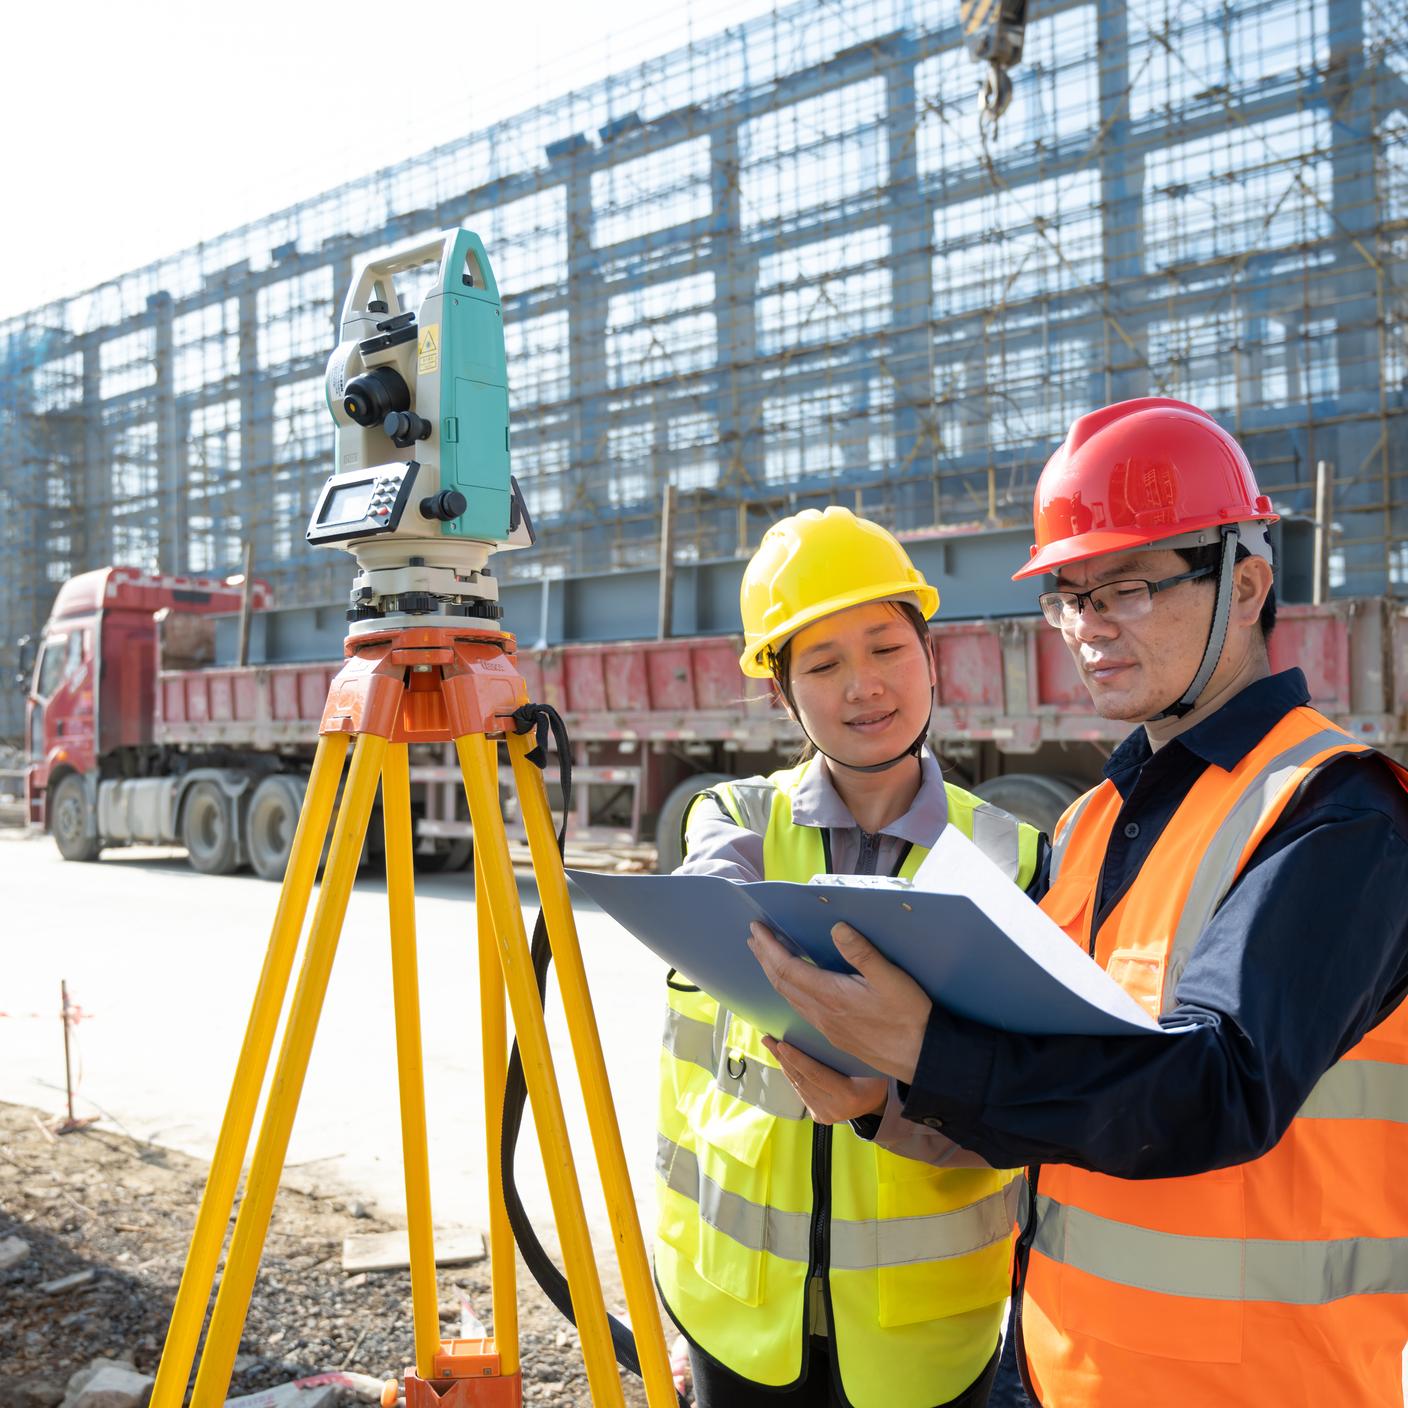 Engineers measure at a construction site in Fujian province, China